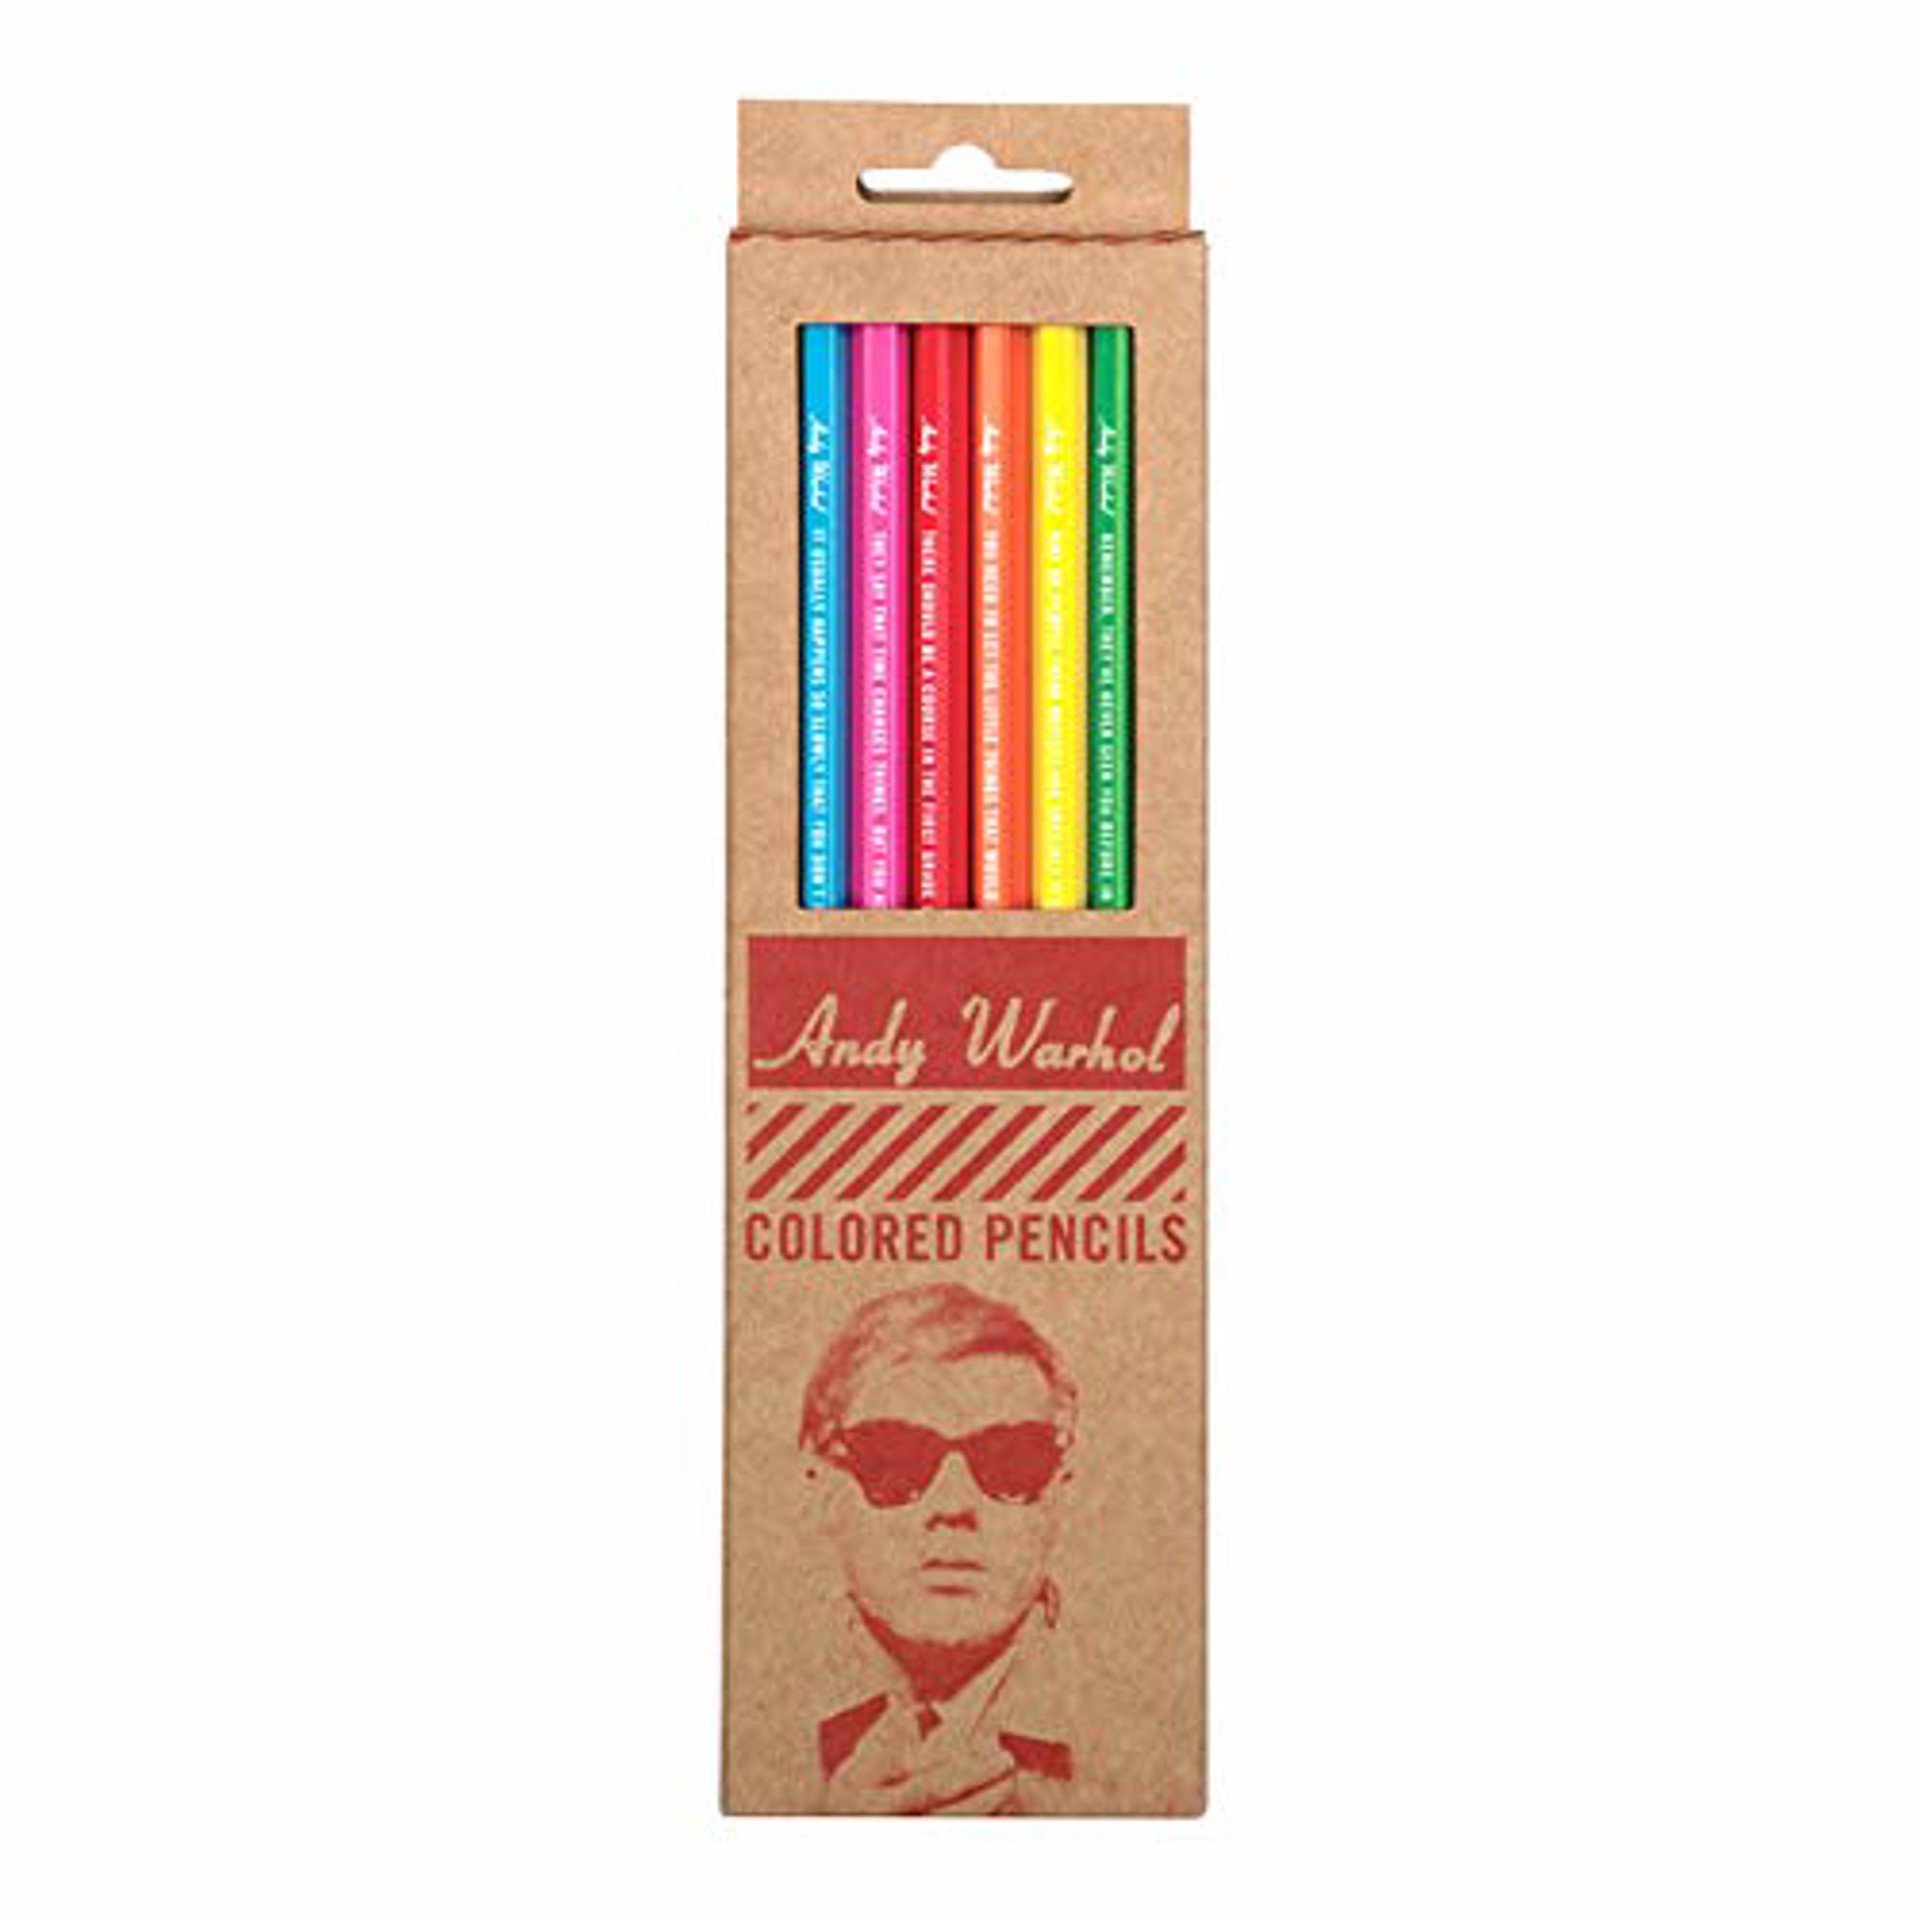 Philosophy 2.0 Colored Pencils by Andy Warhol